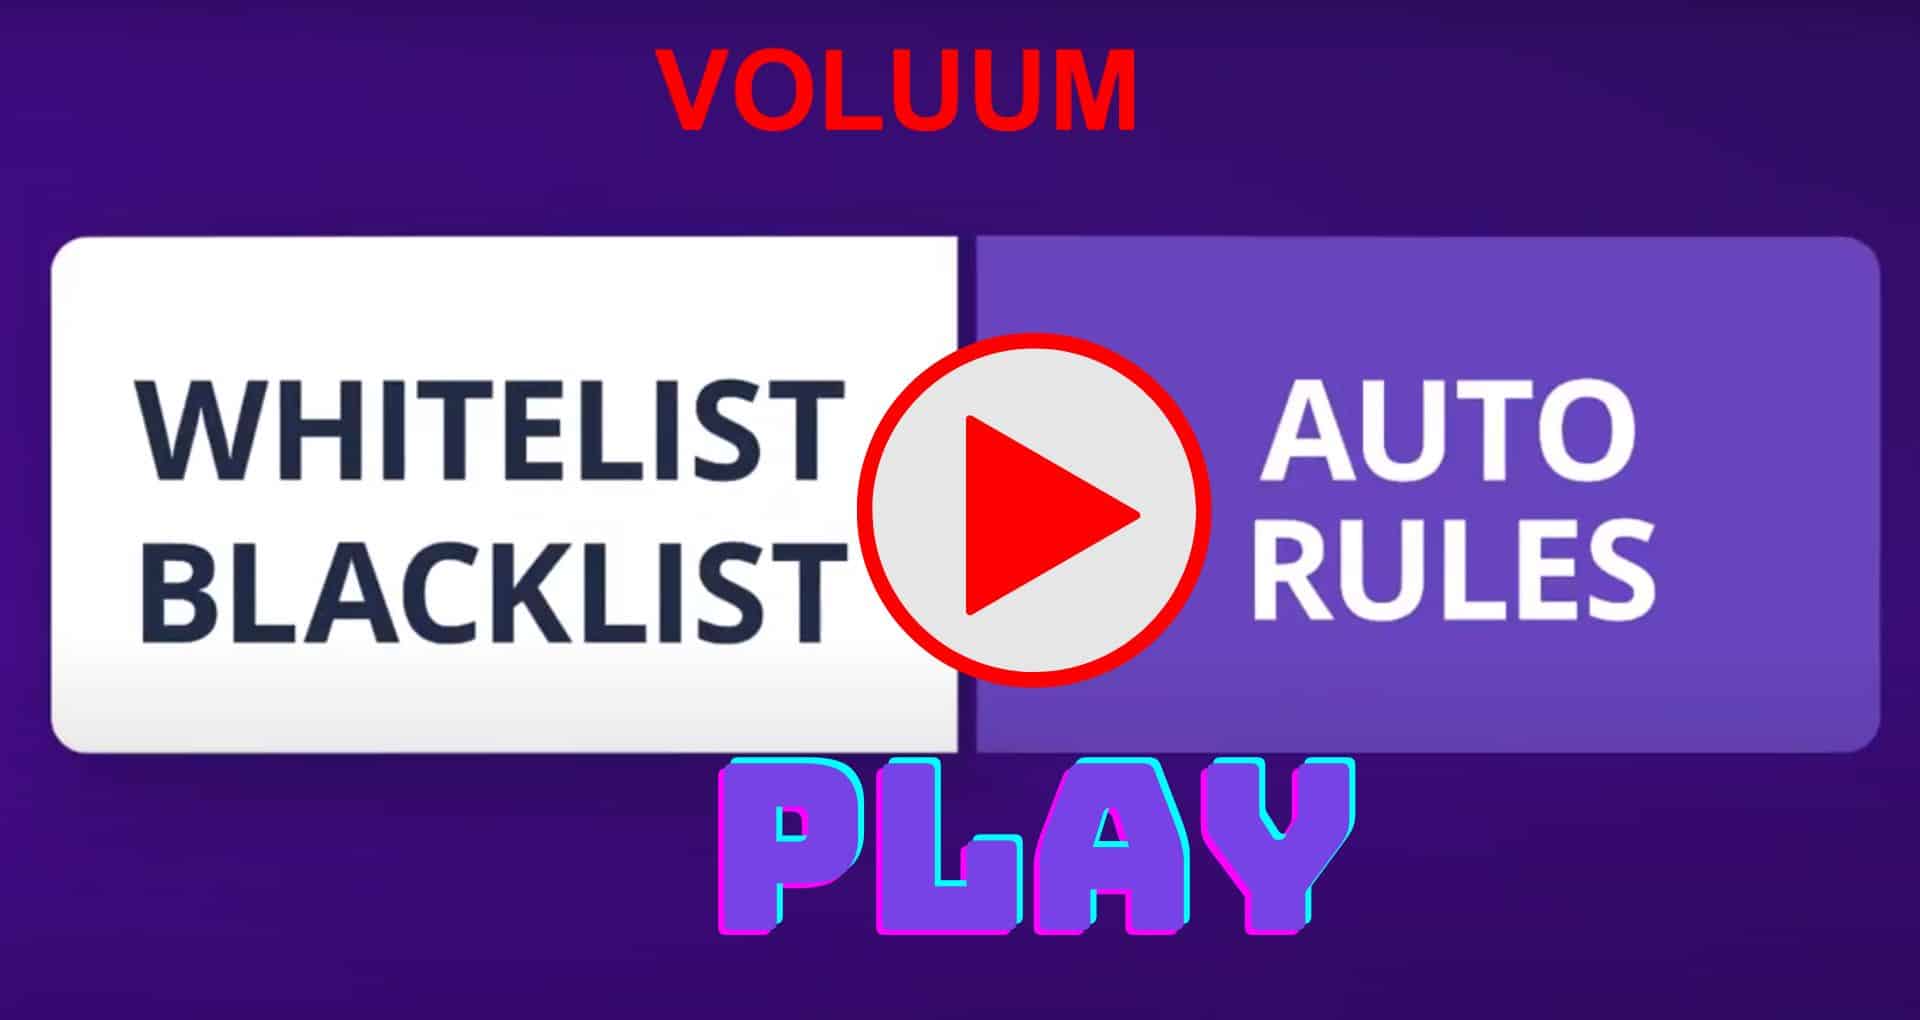 How to use Whitelists Blacklists in Voluum Automizer video